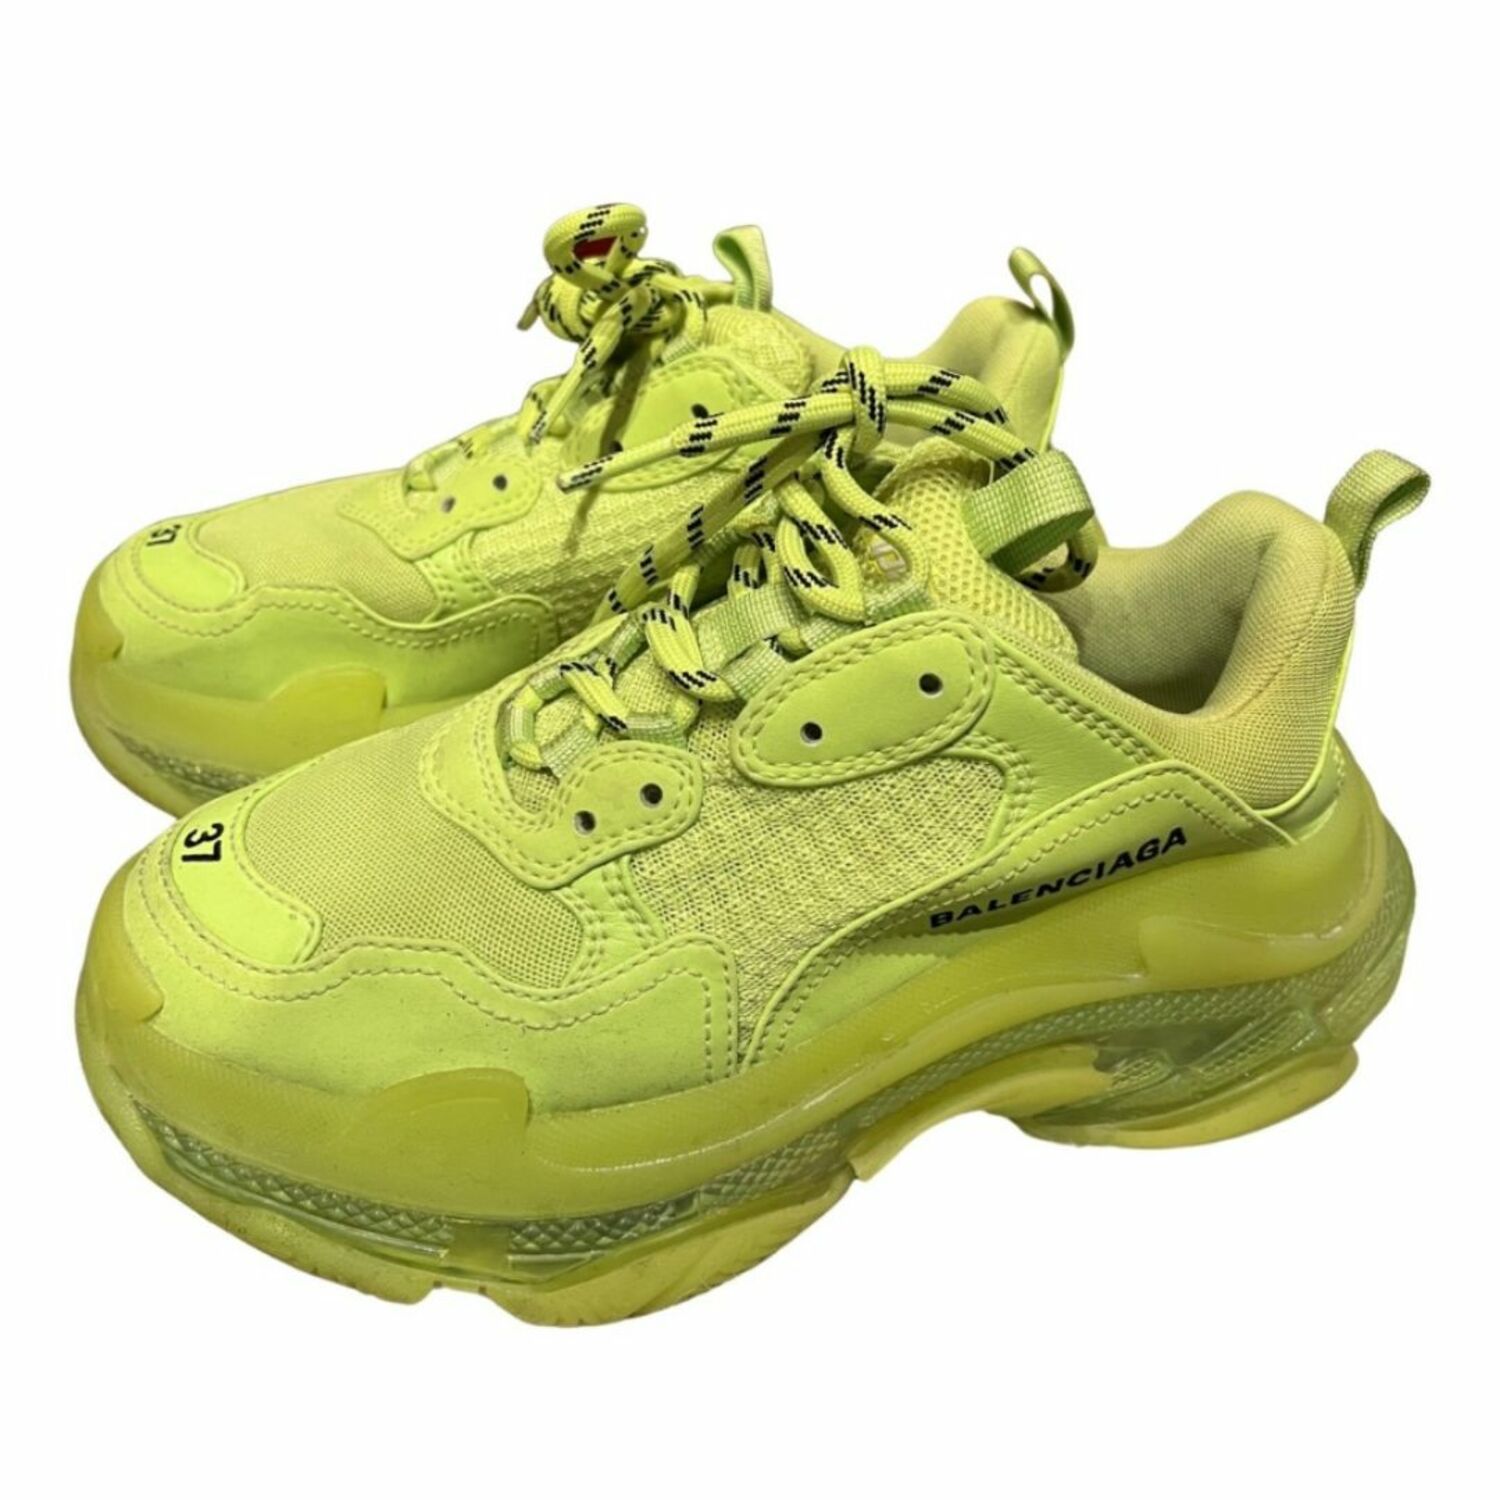 Triple S Sneakers Balenciaga - 37, buy pre-owned at 1800 RON